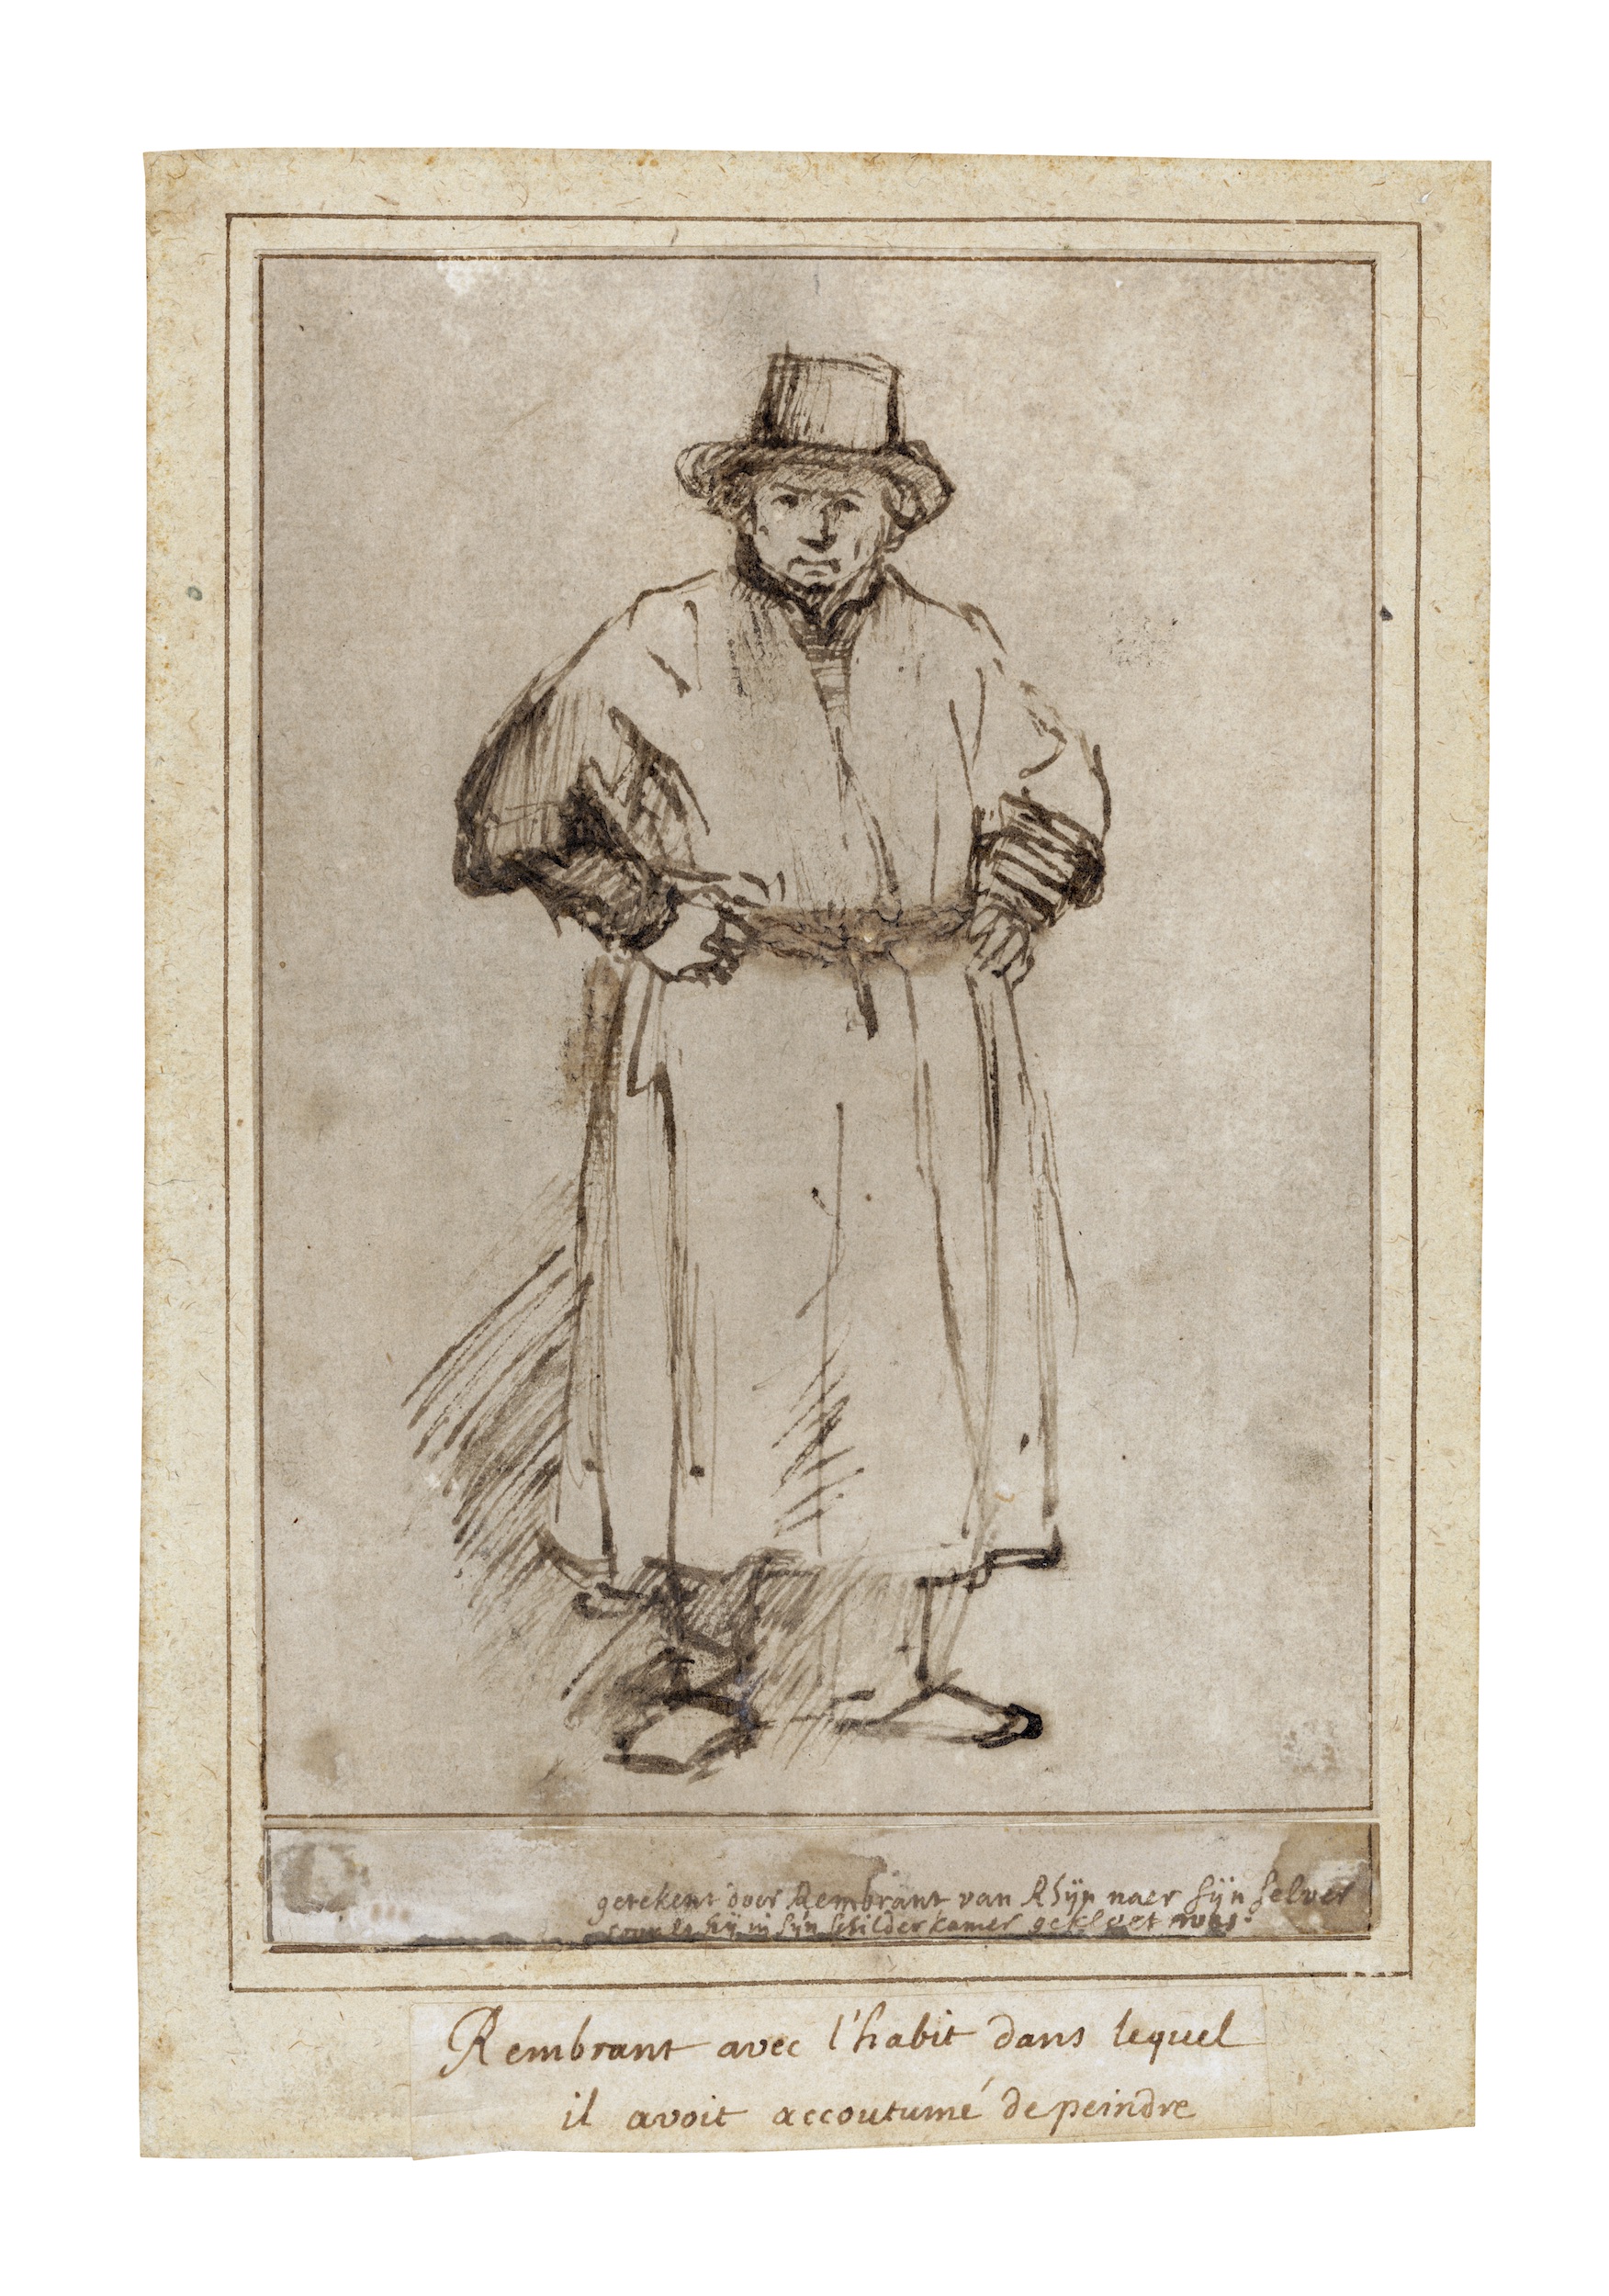 Rembrandt by Willem Drost - c. 1650 - 203 x 134 mm. Rembrandthuis